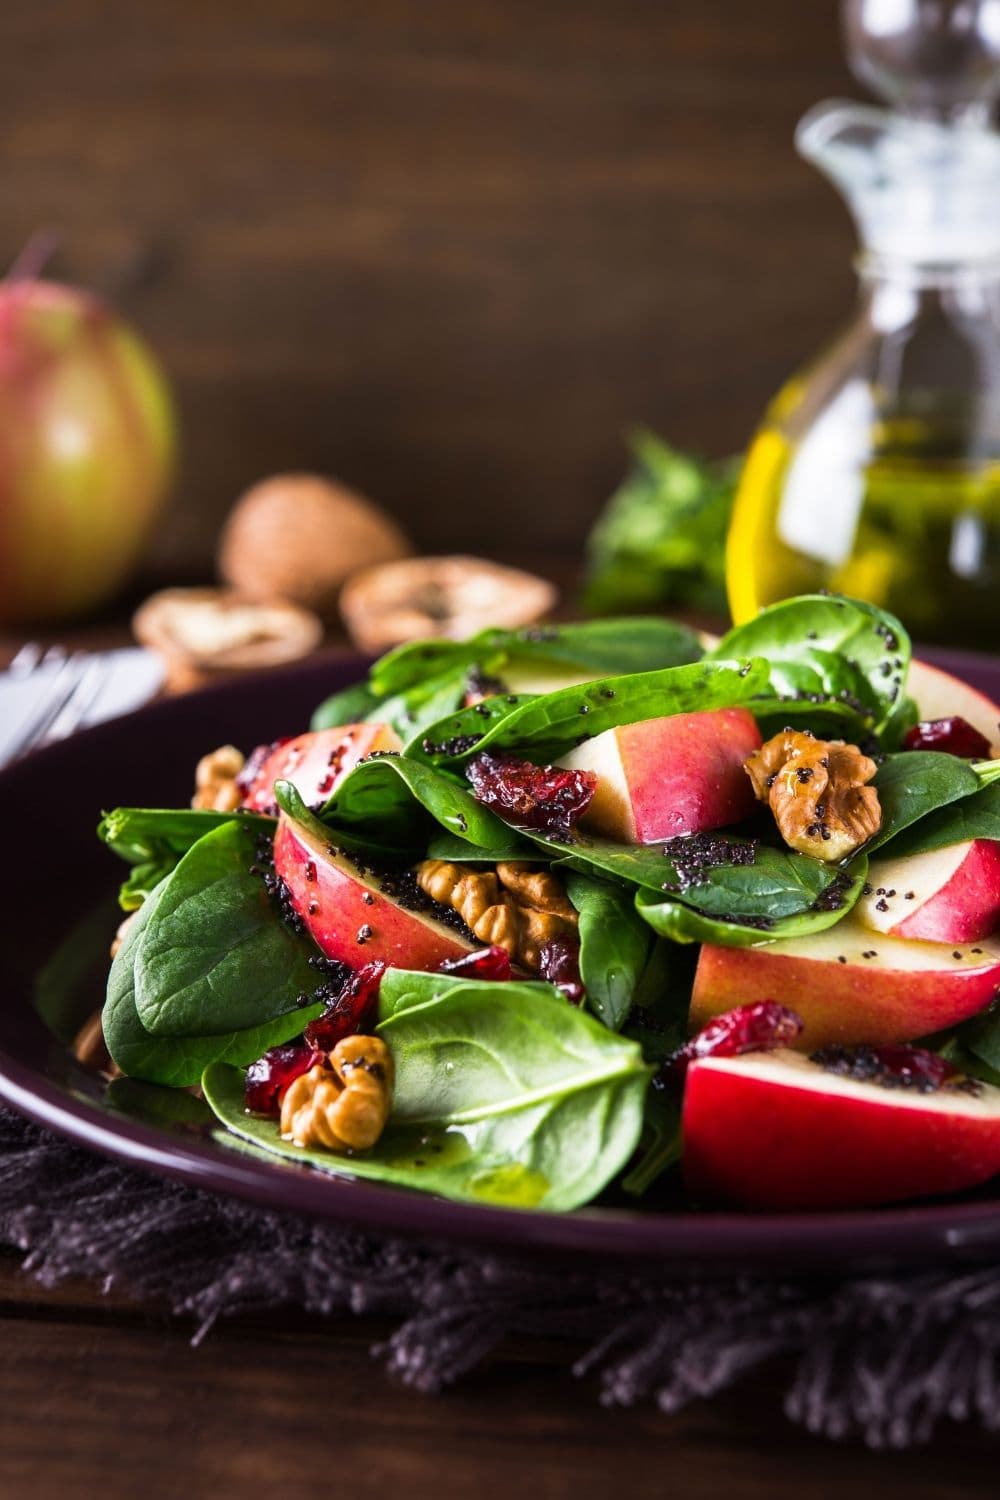 Apple and Spinach Salad with Dried Cranberries and Walnuts